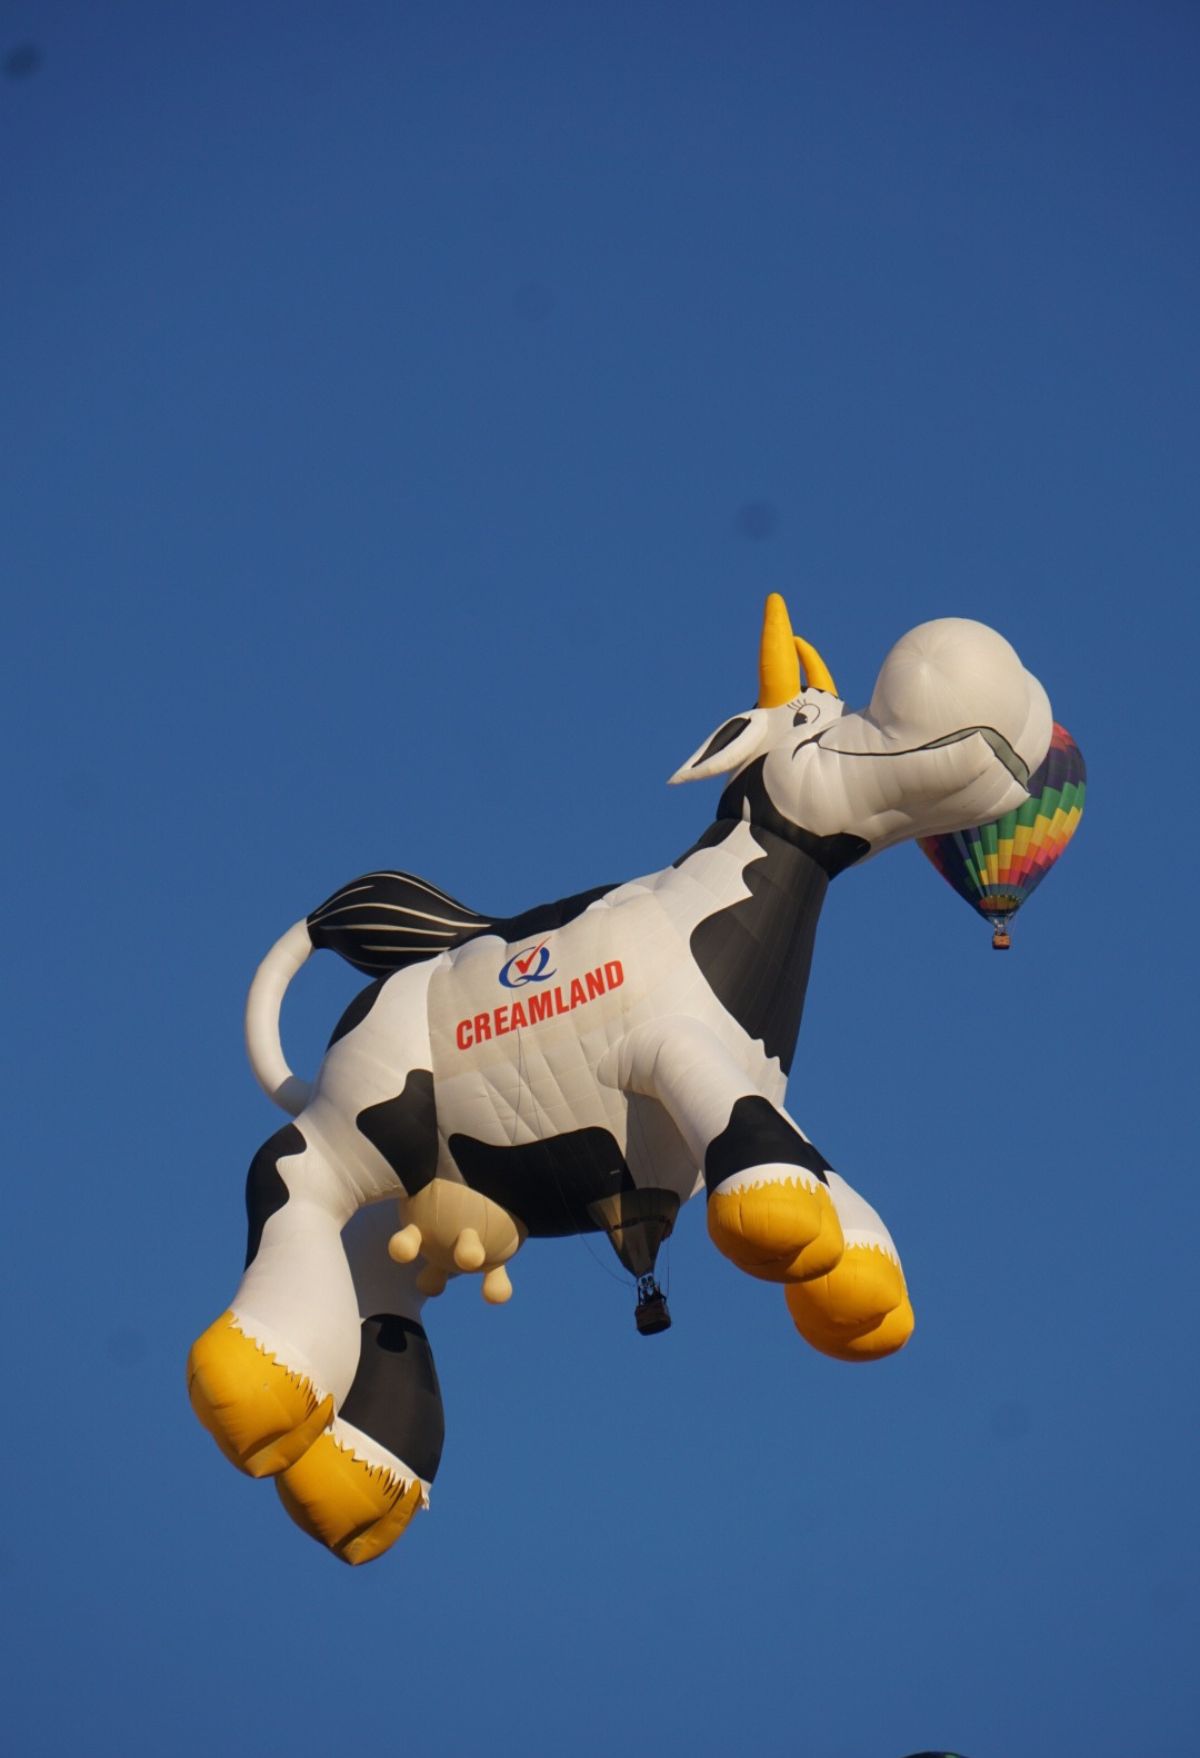 A cow flying in the sky with a balloon.